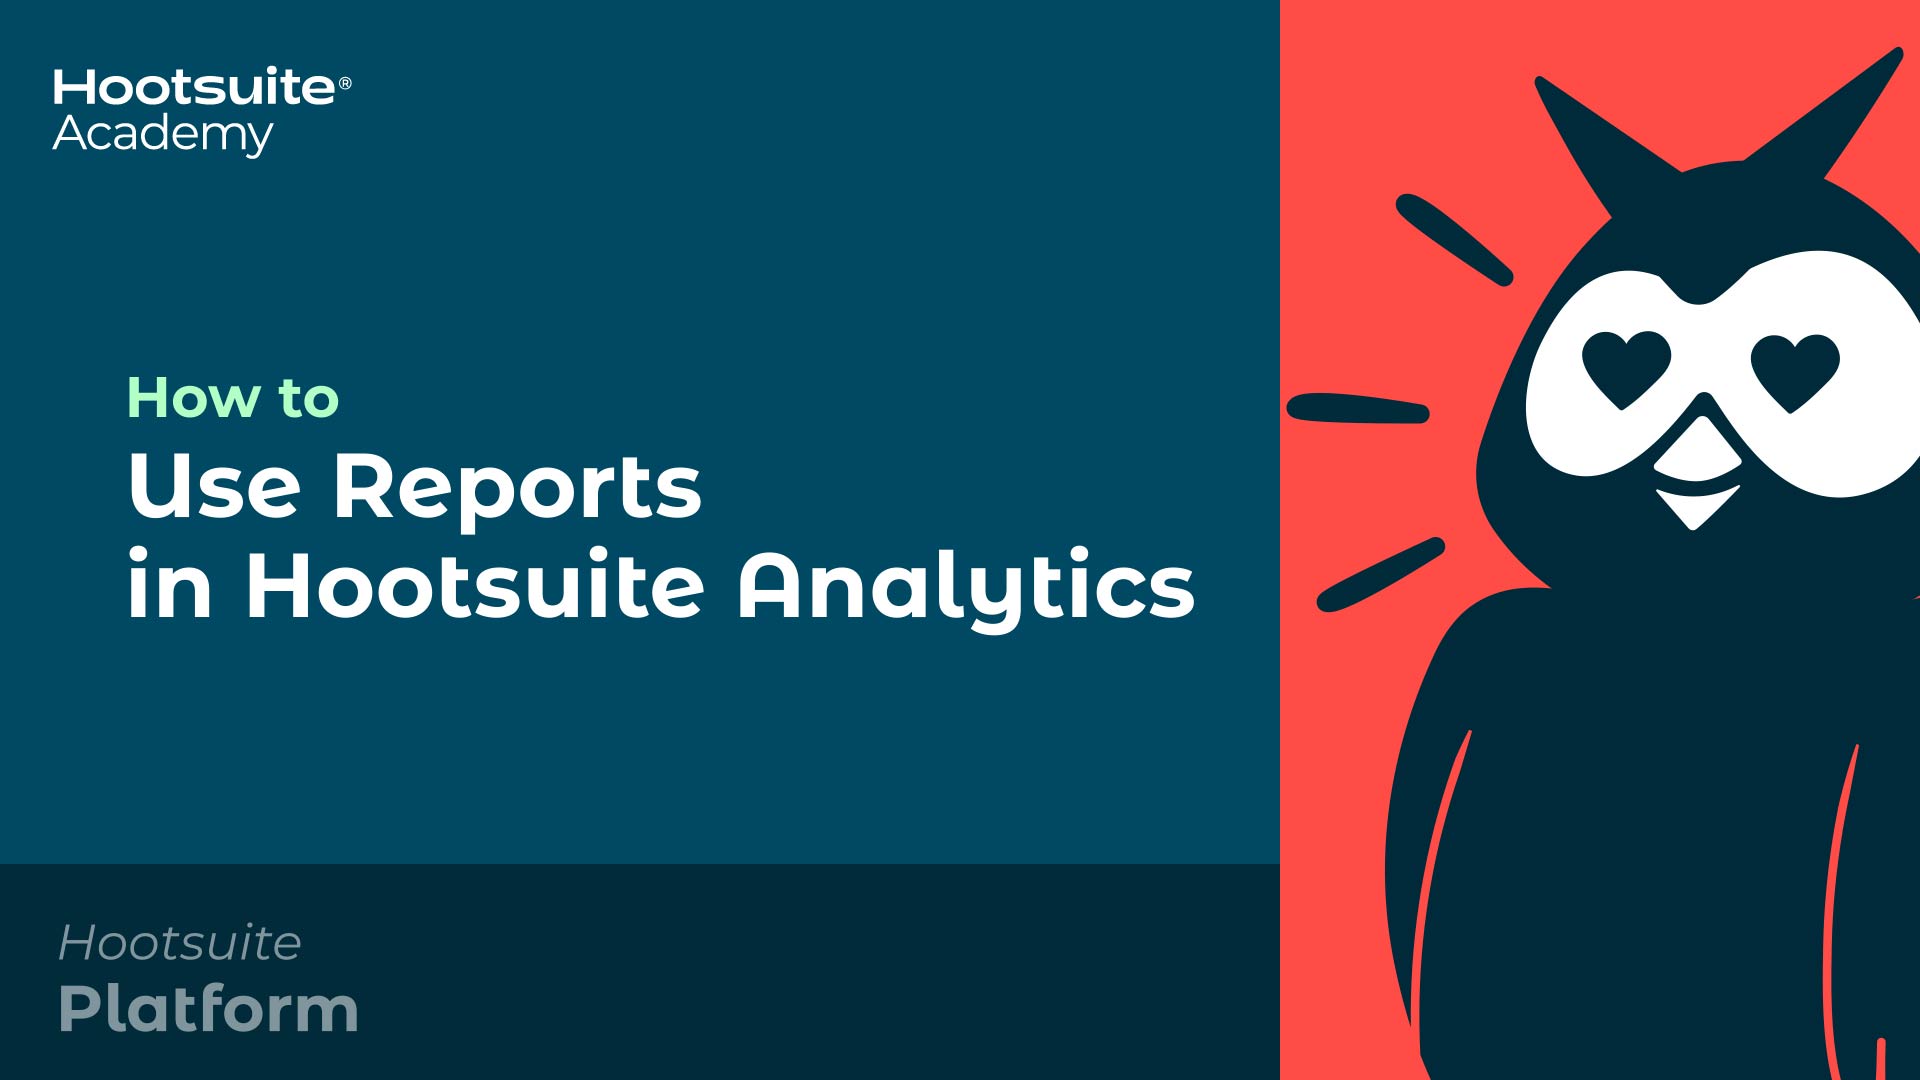 How to use reports in hootsuite analytics video.